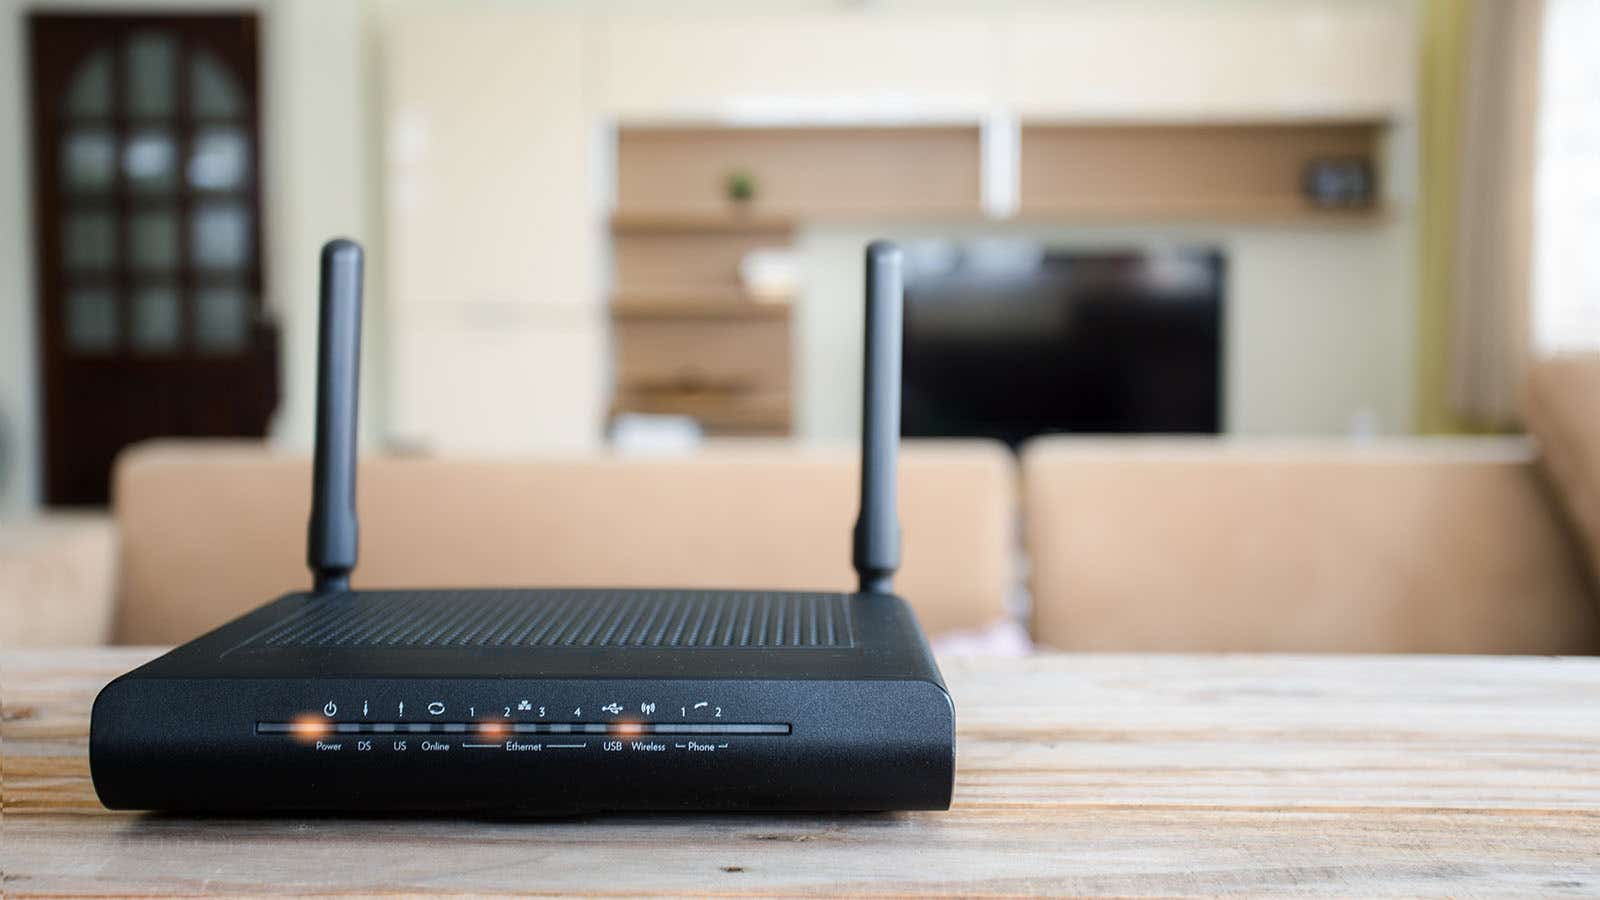 What are the best routers?